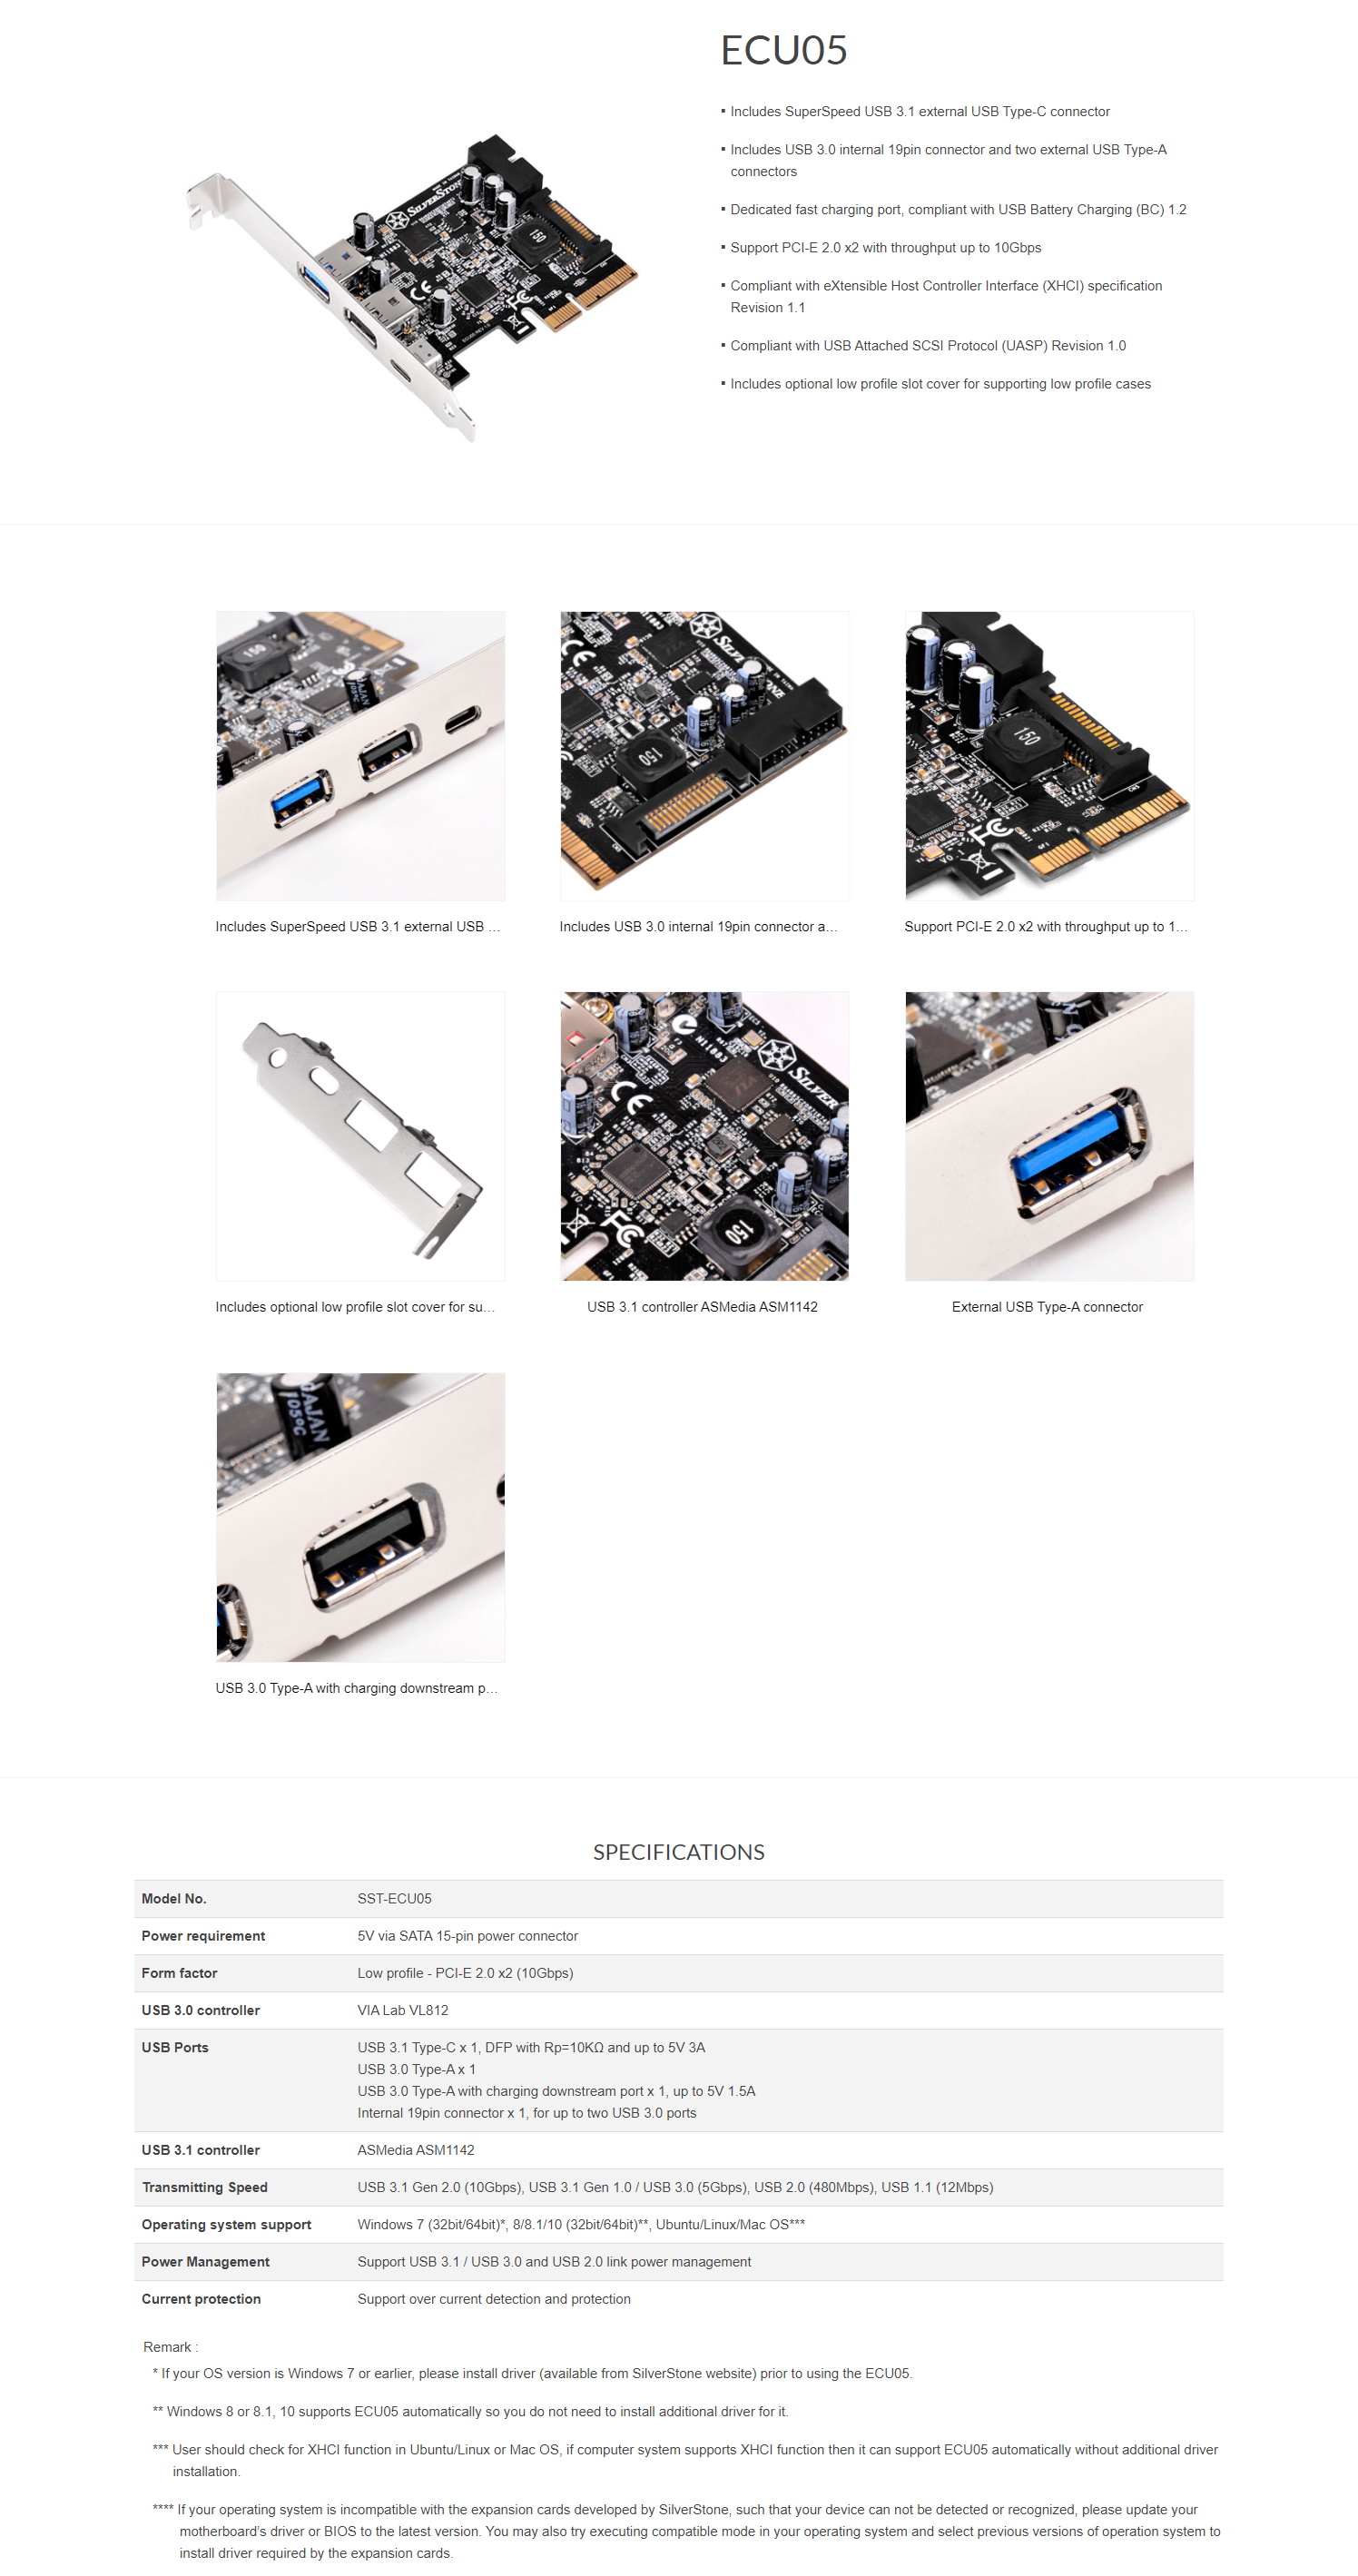 A large marketing image providing additional information about the product SilverStone ECU05 USB3.1 PCIe Controller Card with 2x USB Type-A and 1x USB Type-C Ports - Additional alt info not provided